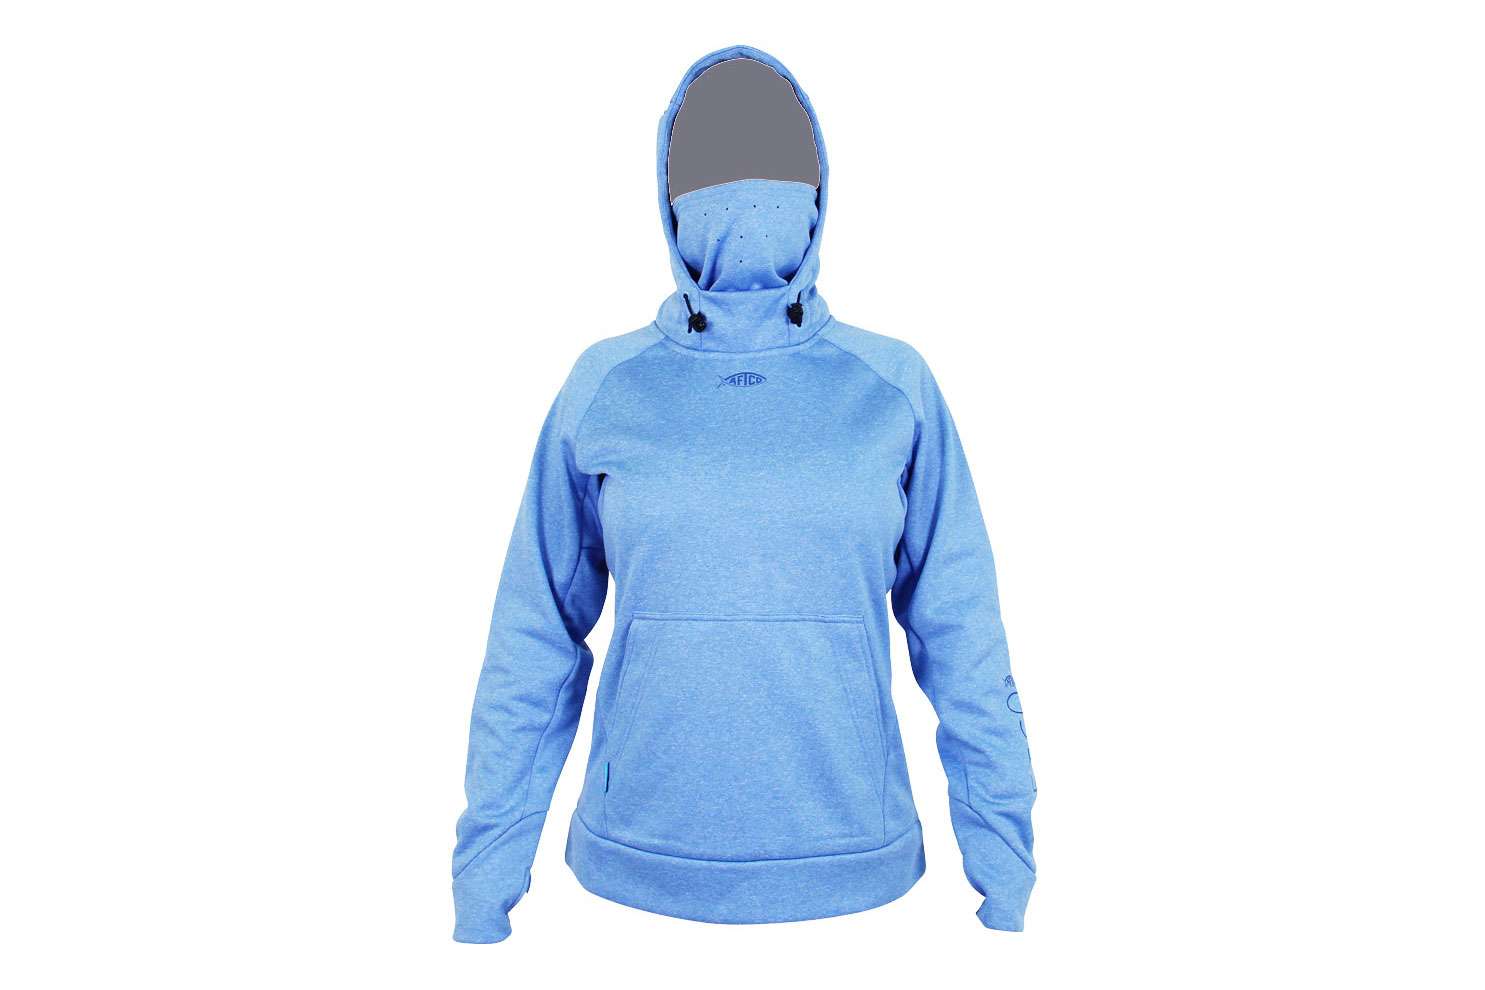    <B>AFTCO Women's Reaper Technical Fleece</B>
<BR>Reaper delivers for the female angler with functional features like an integrated face/neck warmer, laser cut ventilation on mask/underarm, cinch cord hood anchoring system, Block Tapey pocket closure, hi/low position ponytail hood openings, AFGUARD stain release, DWR, mid-hip length and a toasty 100-percent poly bonded micro fleece fabric. No disrespect to your favorite cotton hoodie, but the AFTCO Reaper fleece hoodie will easily be a staple when things cool down and warmth is a necessity.
<BR>
<B>MSRP $69.99</B></p>

<p><a href=